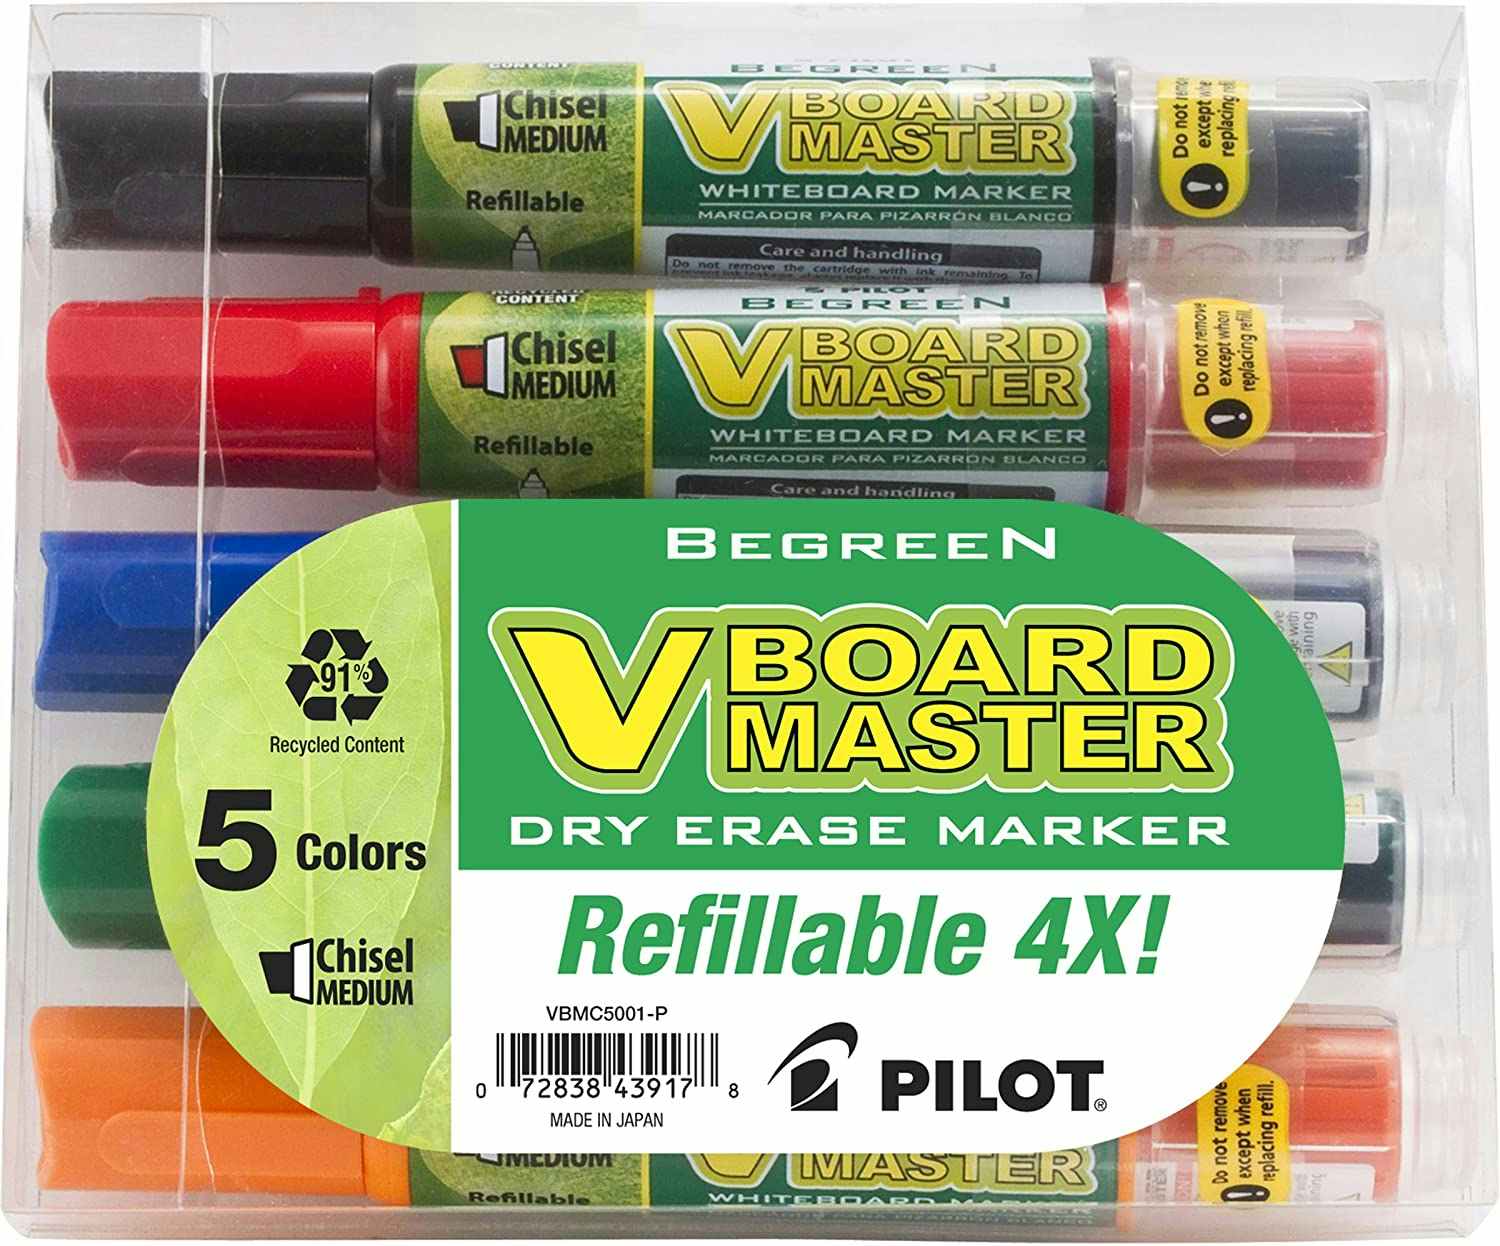 How to Revive Dry Erase Markers and Fix Dried Out Markers - The